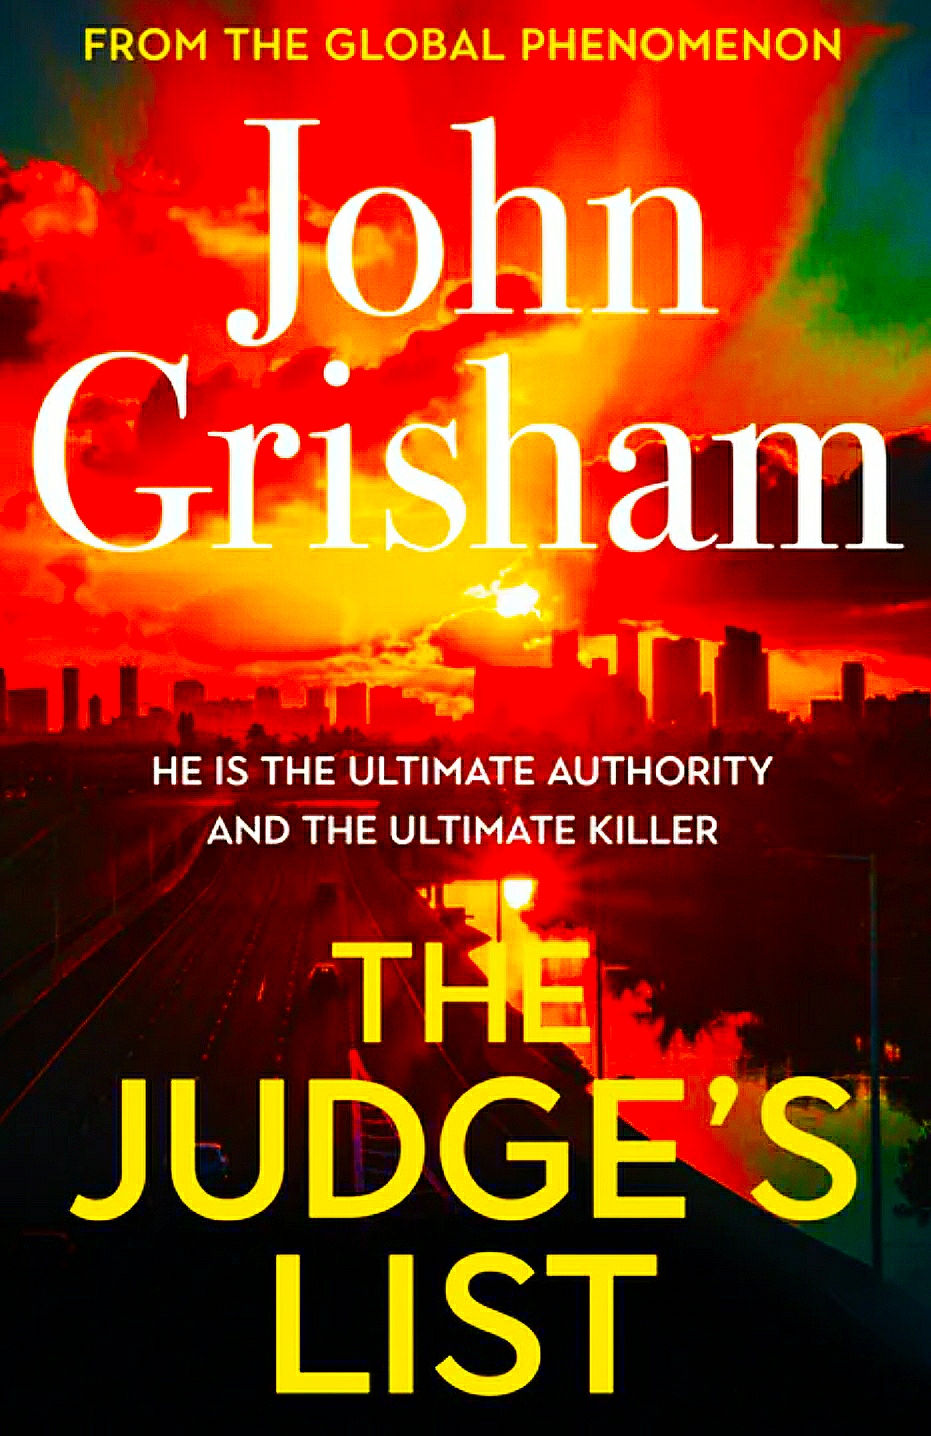 the judge's list book cover